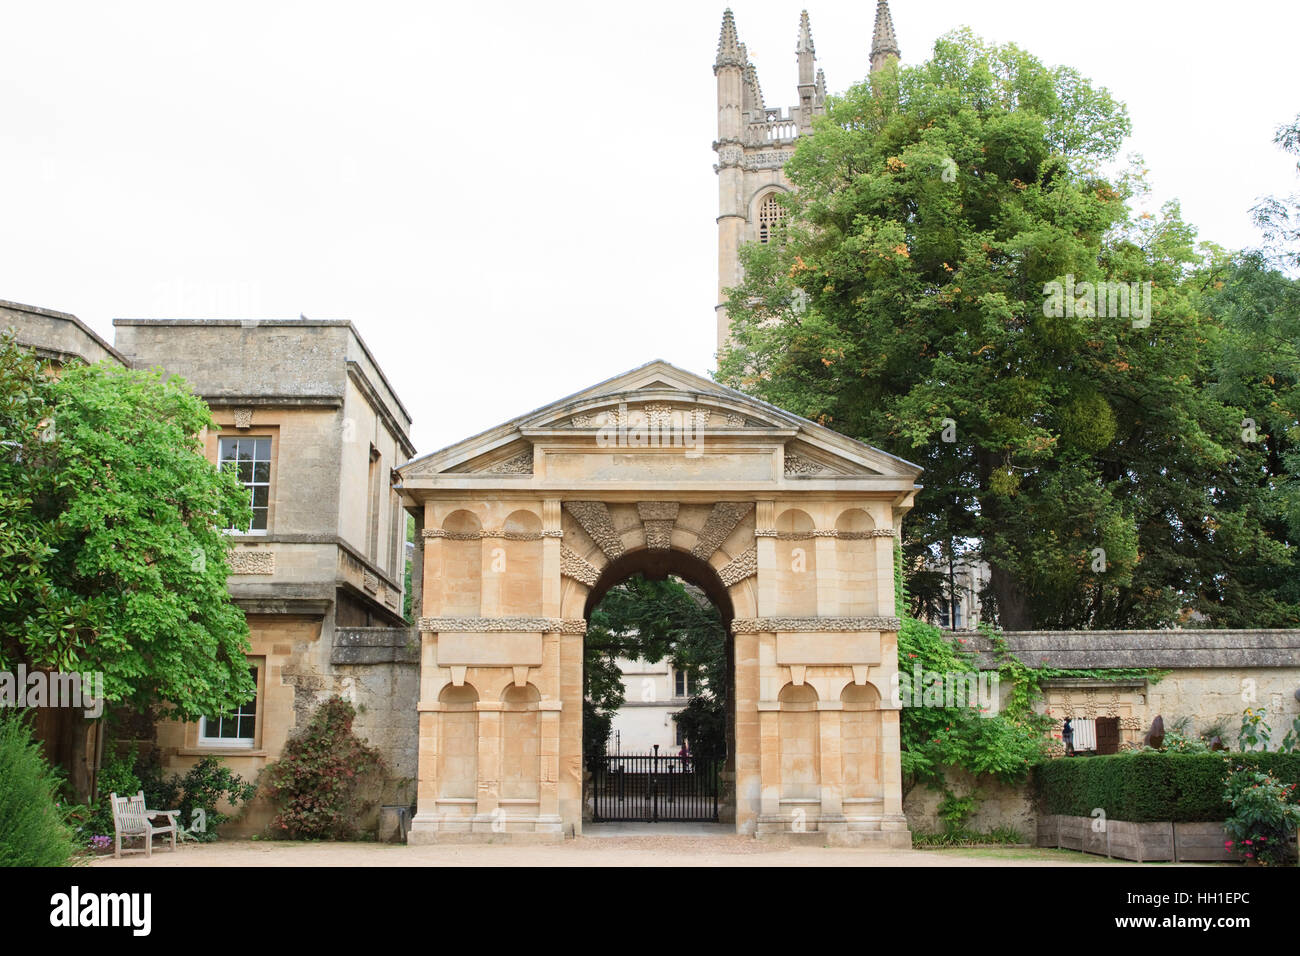 The Danby Gateway (or Arch) in the University of Oxford Botanic Garden, with Magdalen Tower in the background. Stock Photo